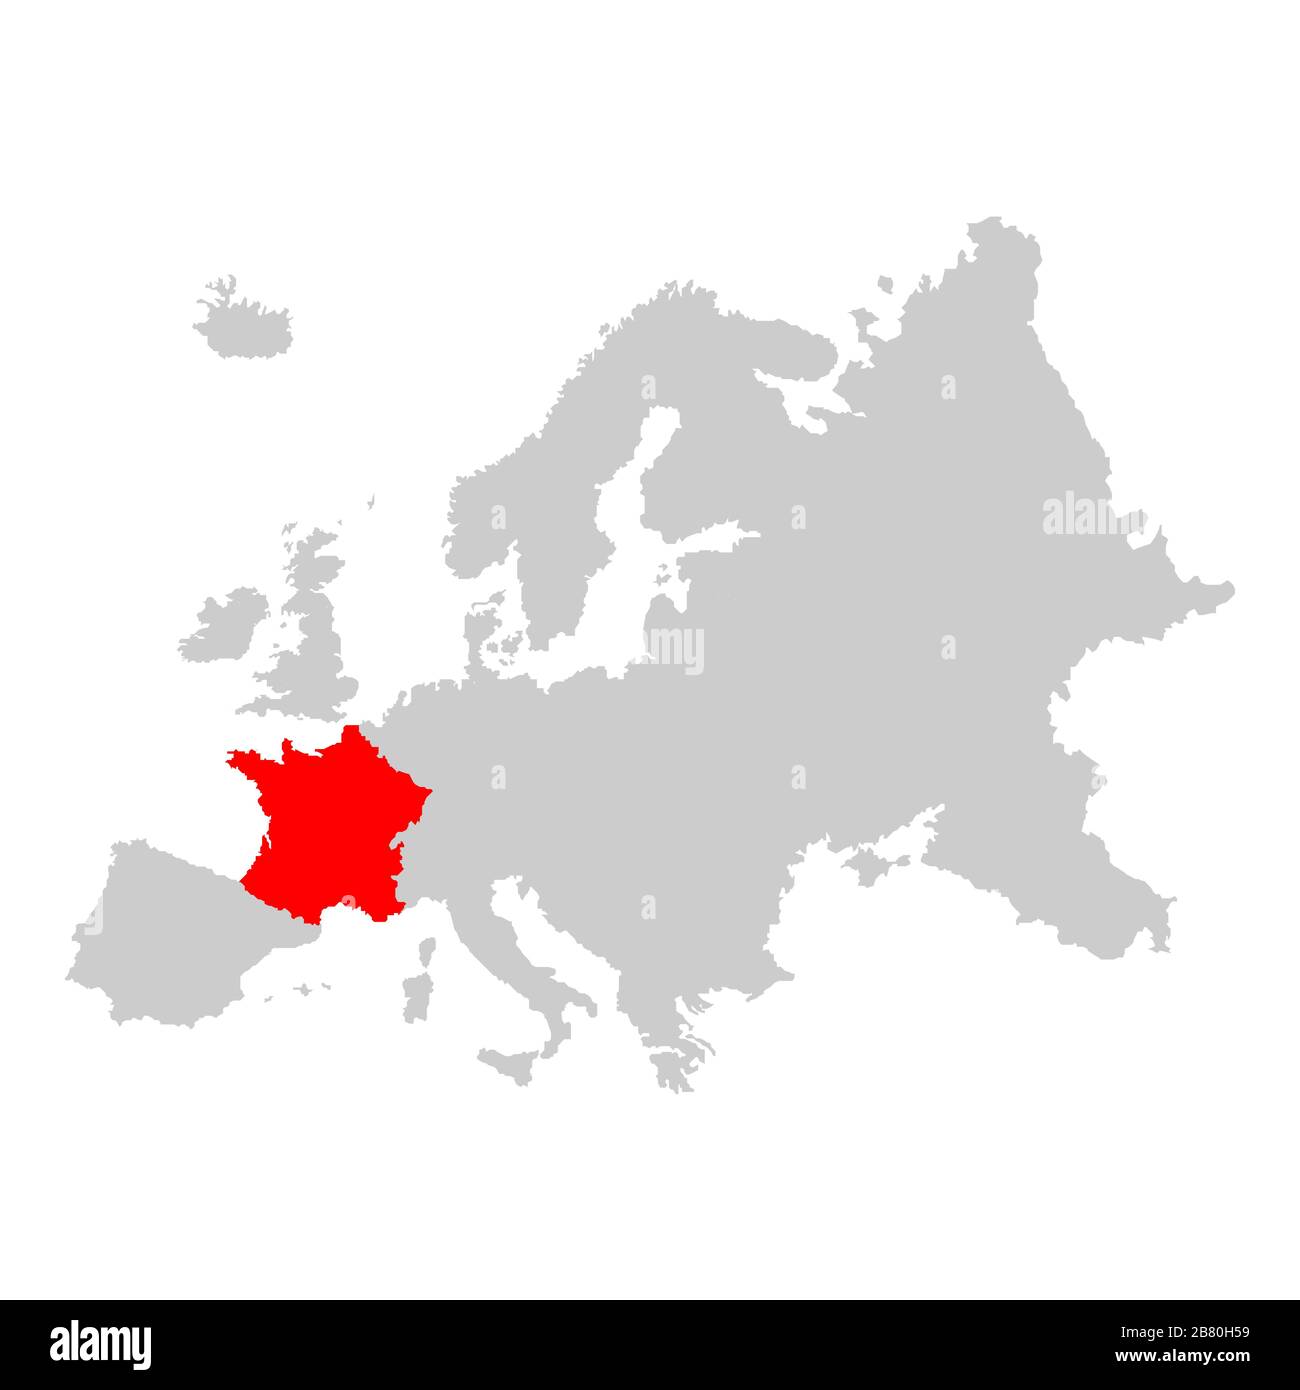 France on map of europe Stock Vector